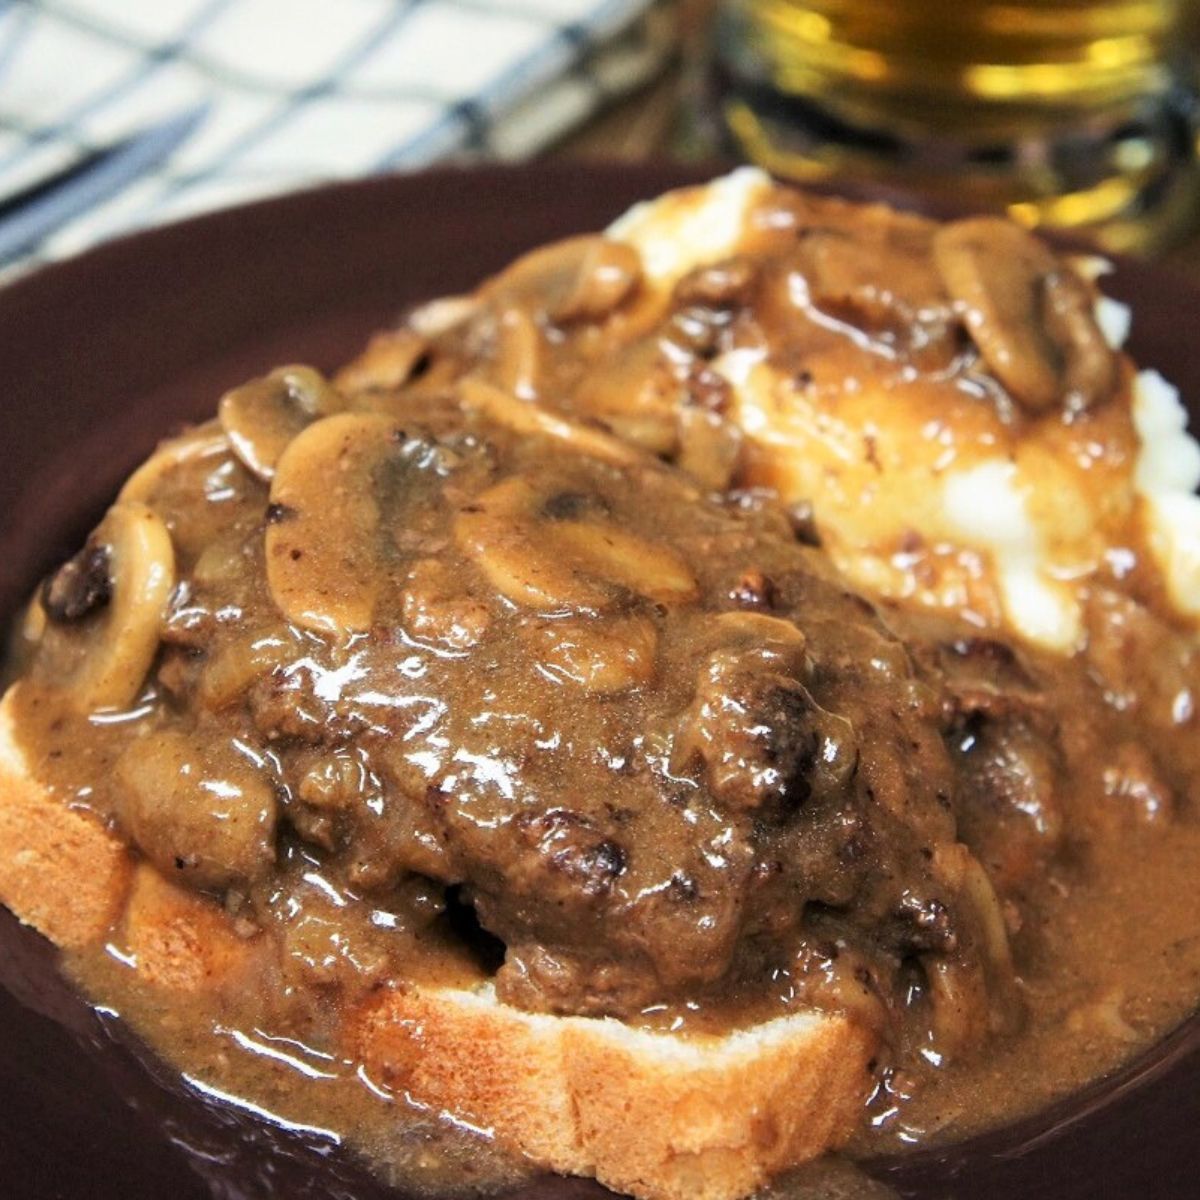 Salisbury Steak Open-Face Sandwich served with a side of mashed potatoes and covered with mushroom gravy on a brown plate